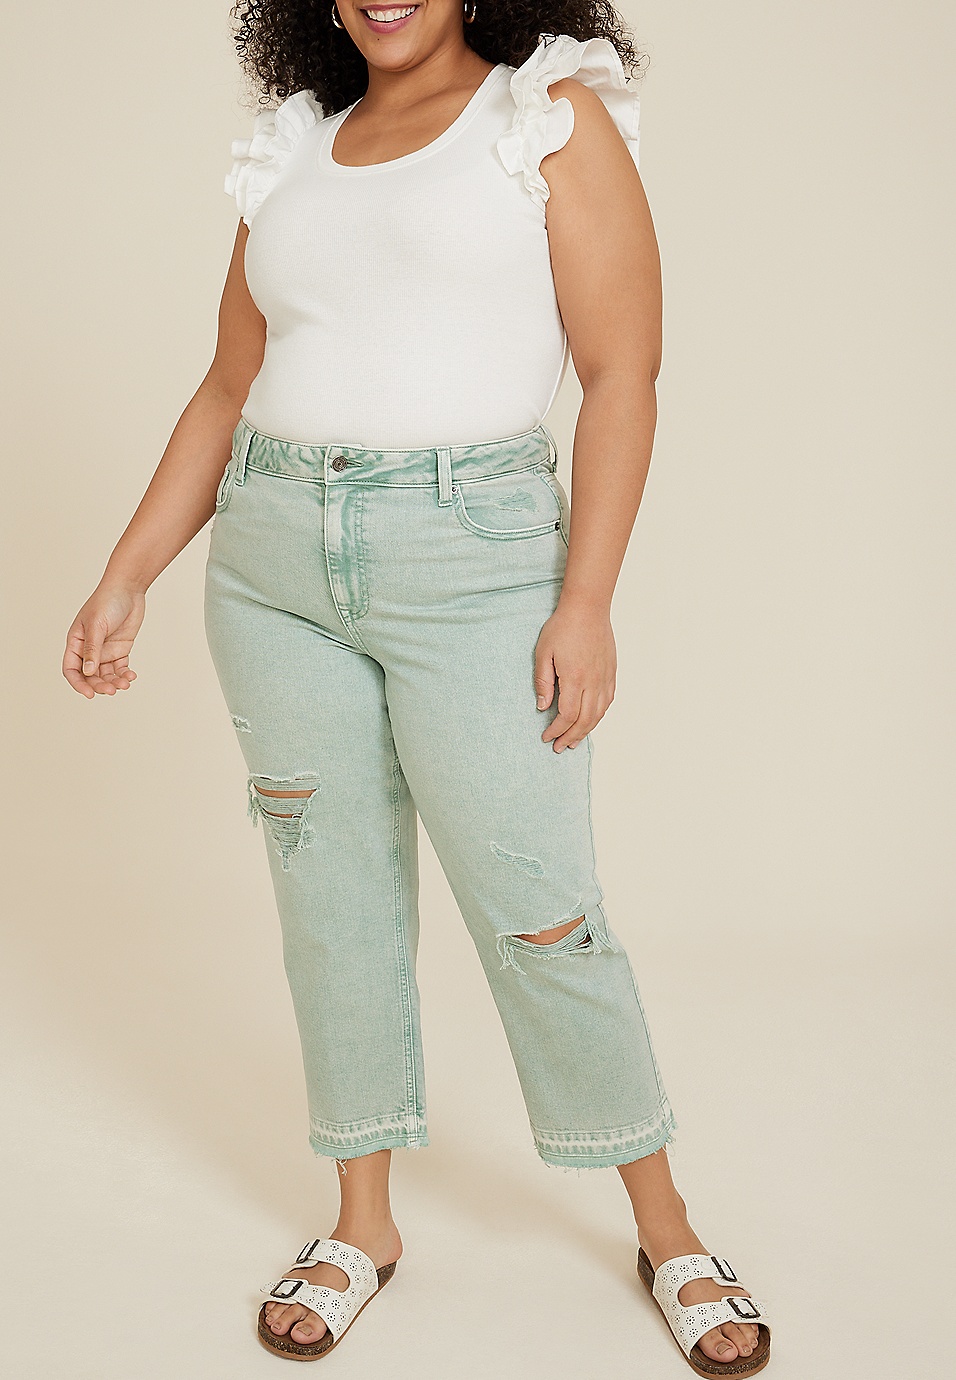 Plus Size m jeans by maurices™ Acid Green High Rise Cropped Jean